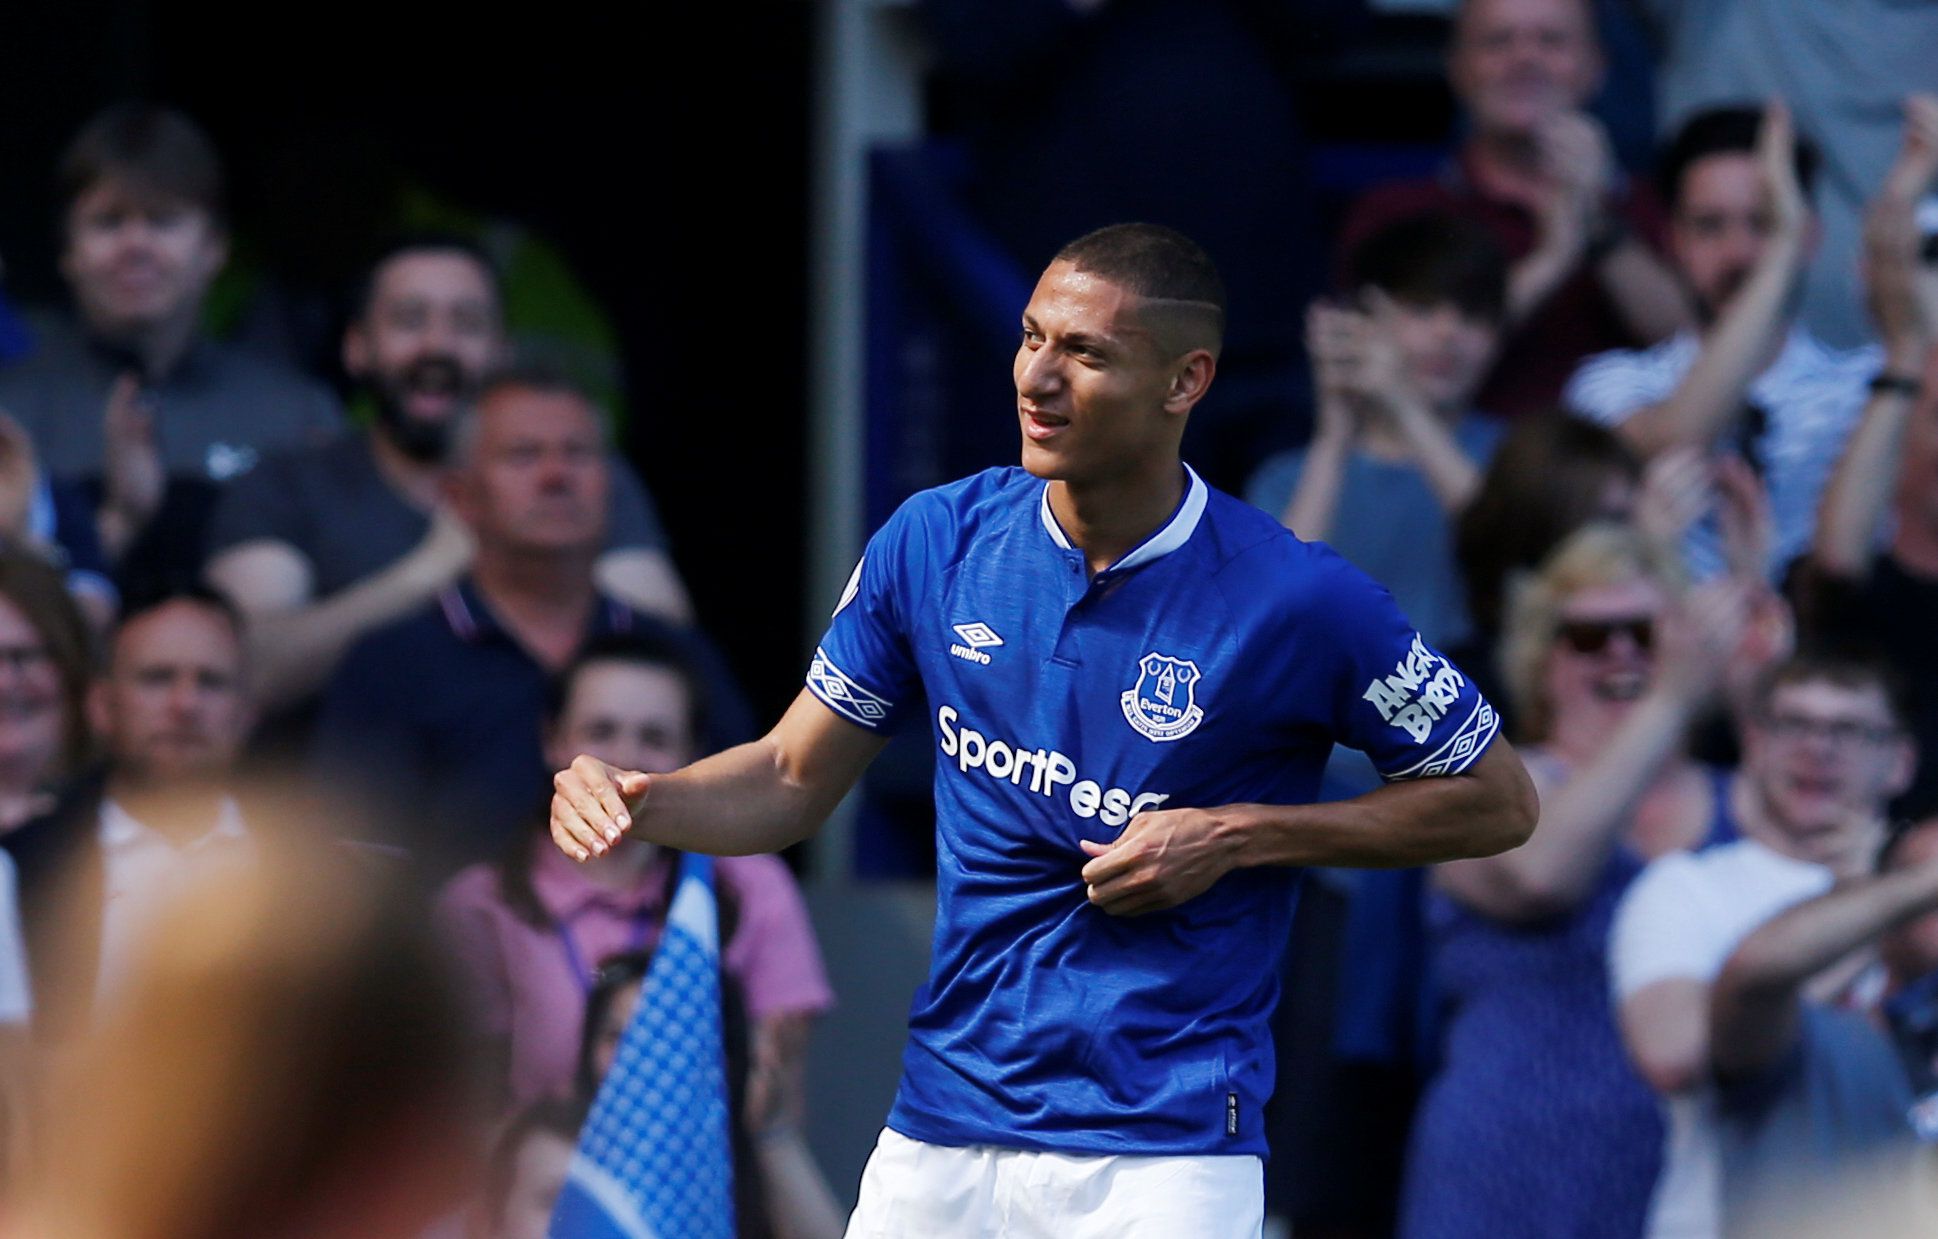 Soccer Football - Premier League - Everton v Manchester United - Goodison Park, Liverpool, Britain - April 21, 2019  Everton's Richarlison celebrates scoring their first goal       REUTERS/Andrew Yates  EDITORIAL USE ONLY. No use with unauthorized audio, video, data, fixture lists, club/league logos or 